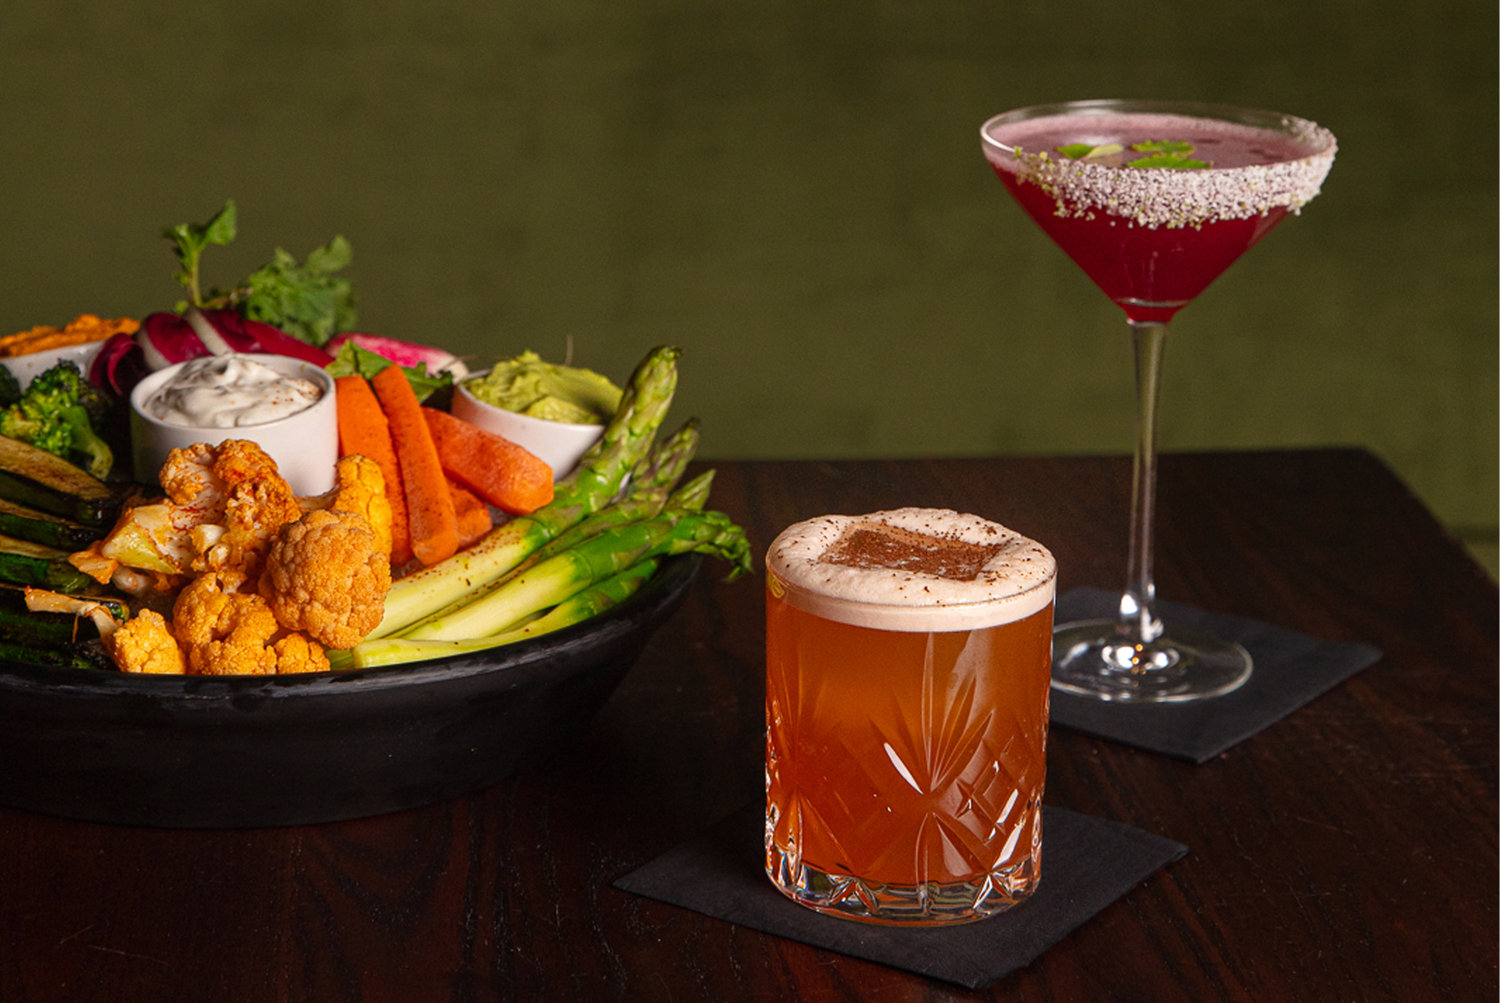 Drinks are crafted to pair with a menu of savory veg-forward bar snacks